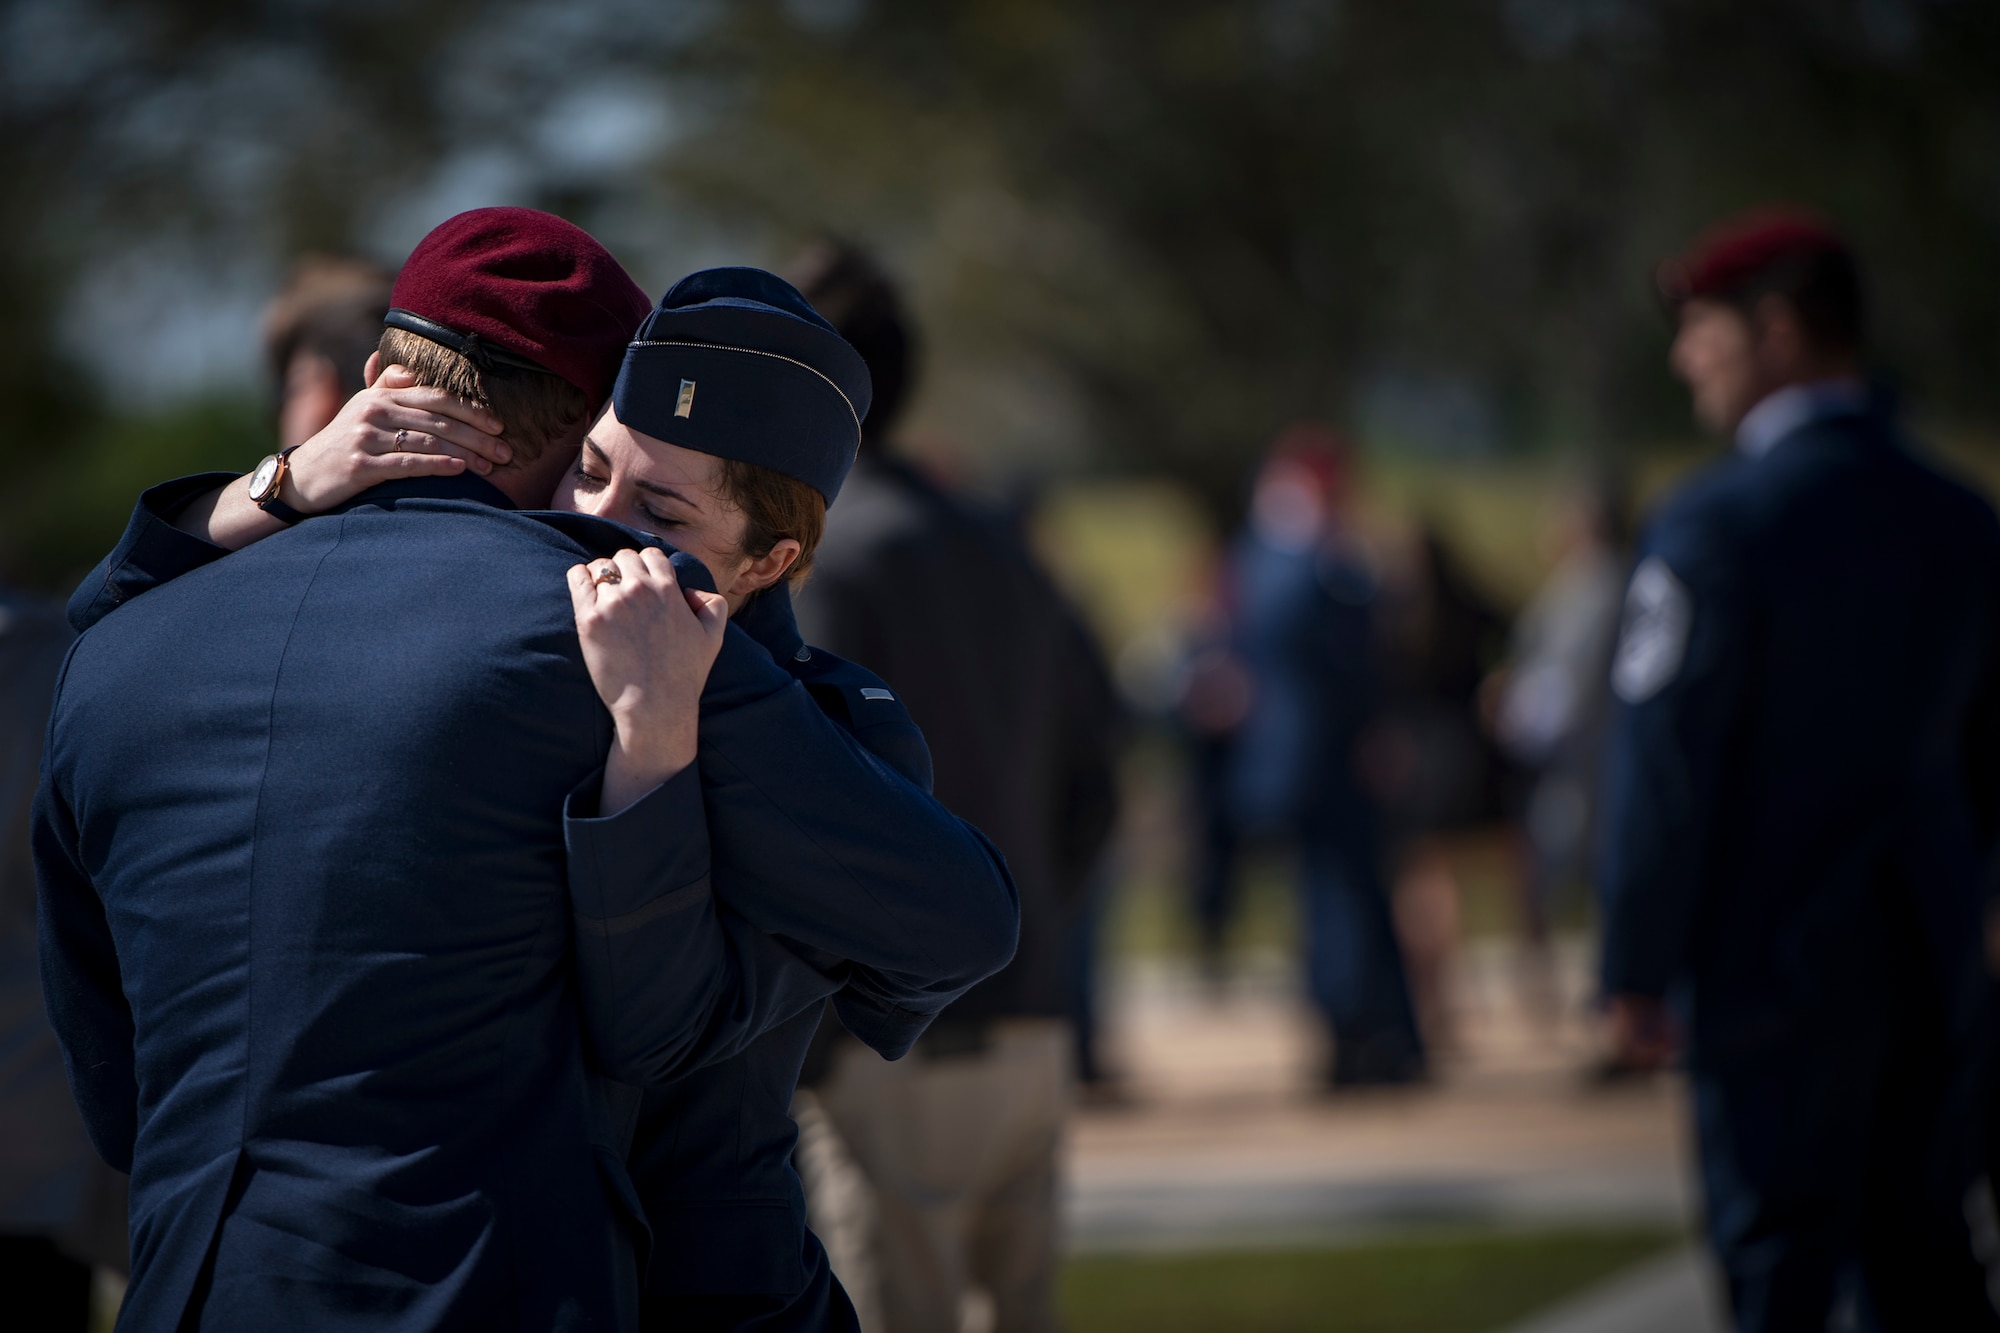 Airmen embrace following a memorial service in honor of Capt. Mark Weber, March 21, 2018, at Moody Air Force Base, Ga. Weber, a 38th Rescue Squadron combat rescue officer and Texas native, was killed in an HH-60G Pave Hawk crash in Anbar Province, Iraq, March 15. During the ceremony, Weber was posthumously awarded a Meritorious Service Medal and the Air Force Commendation Medal. (U.S. Air Force photo by Staff Sgt. Ryan Callaghan)